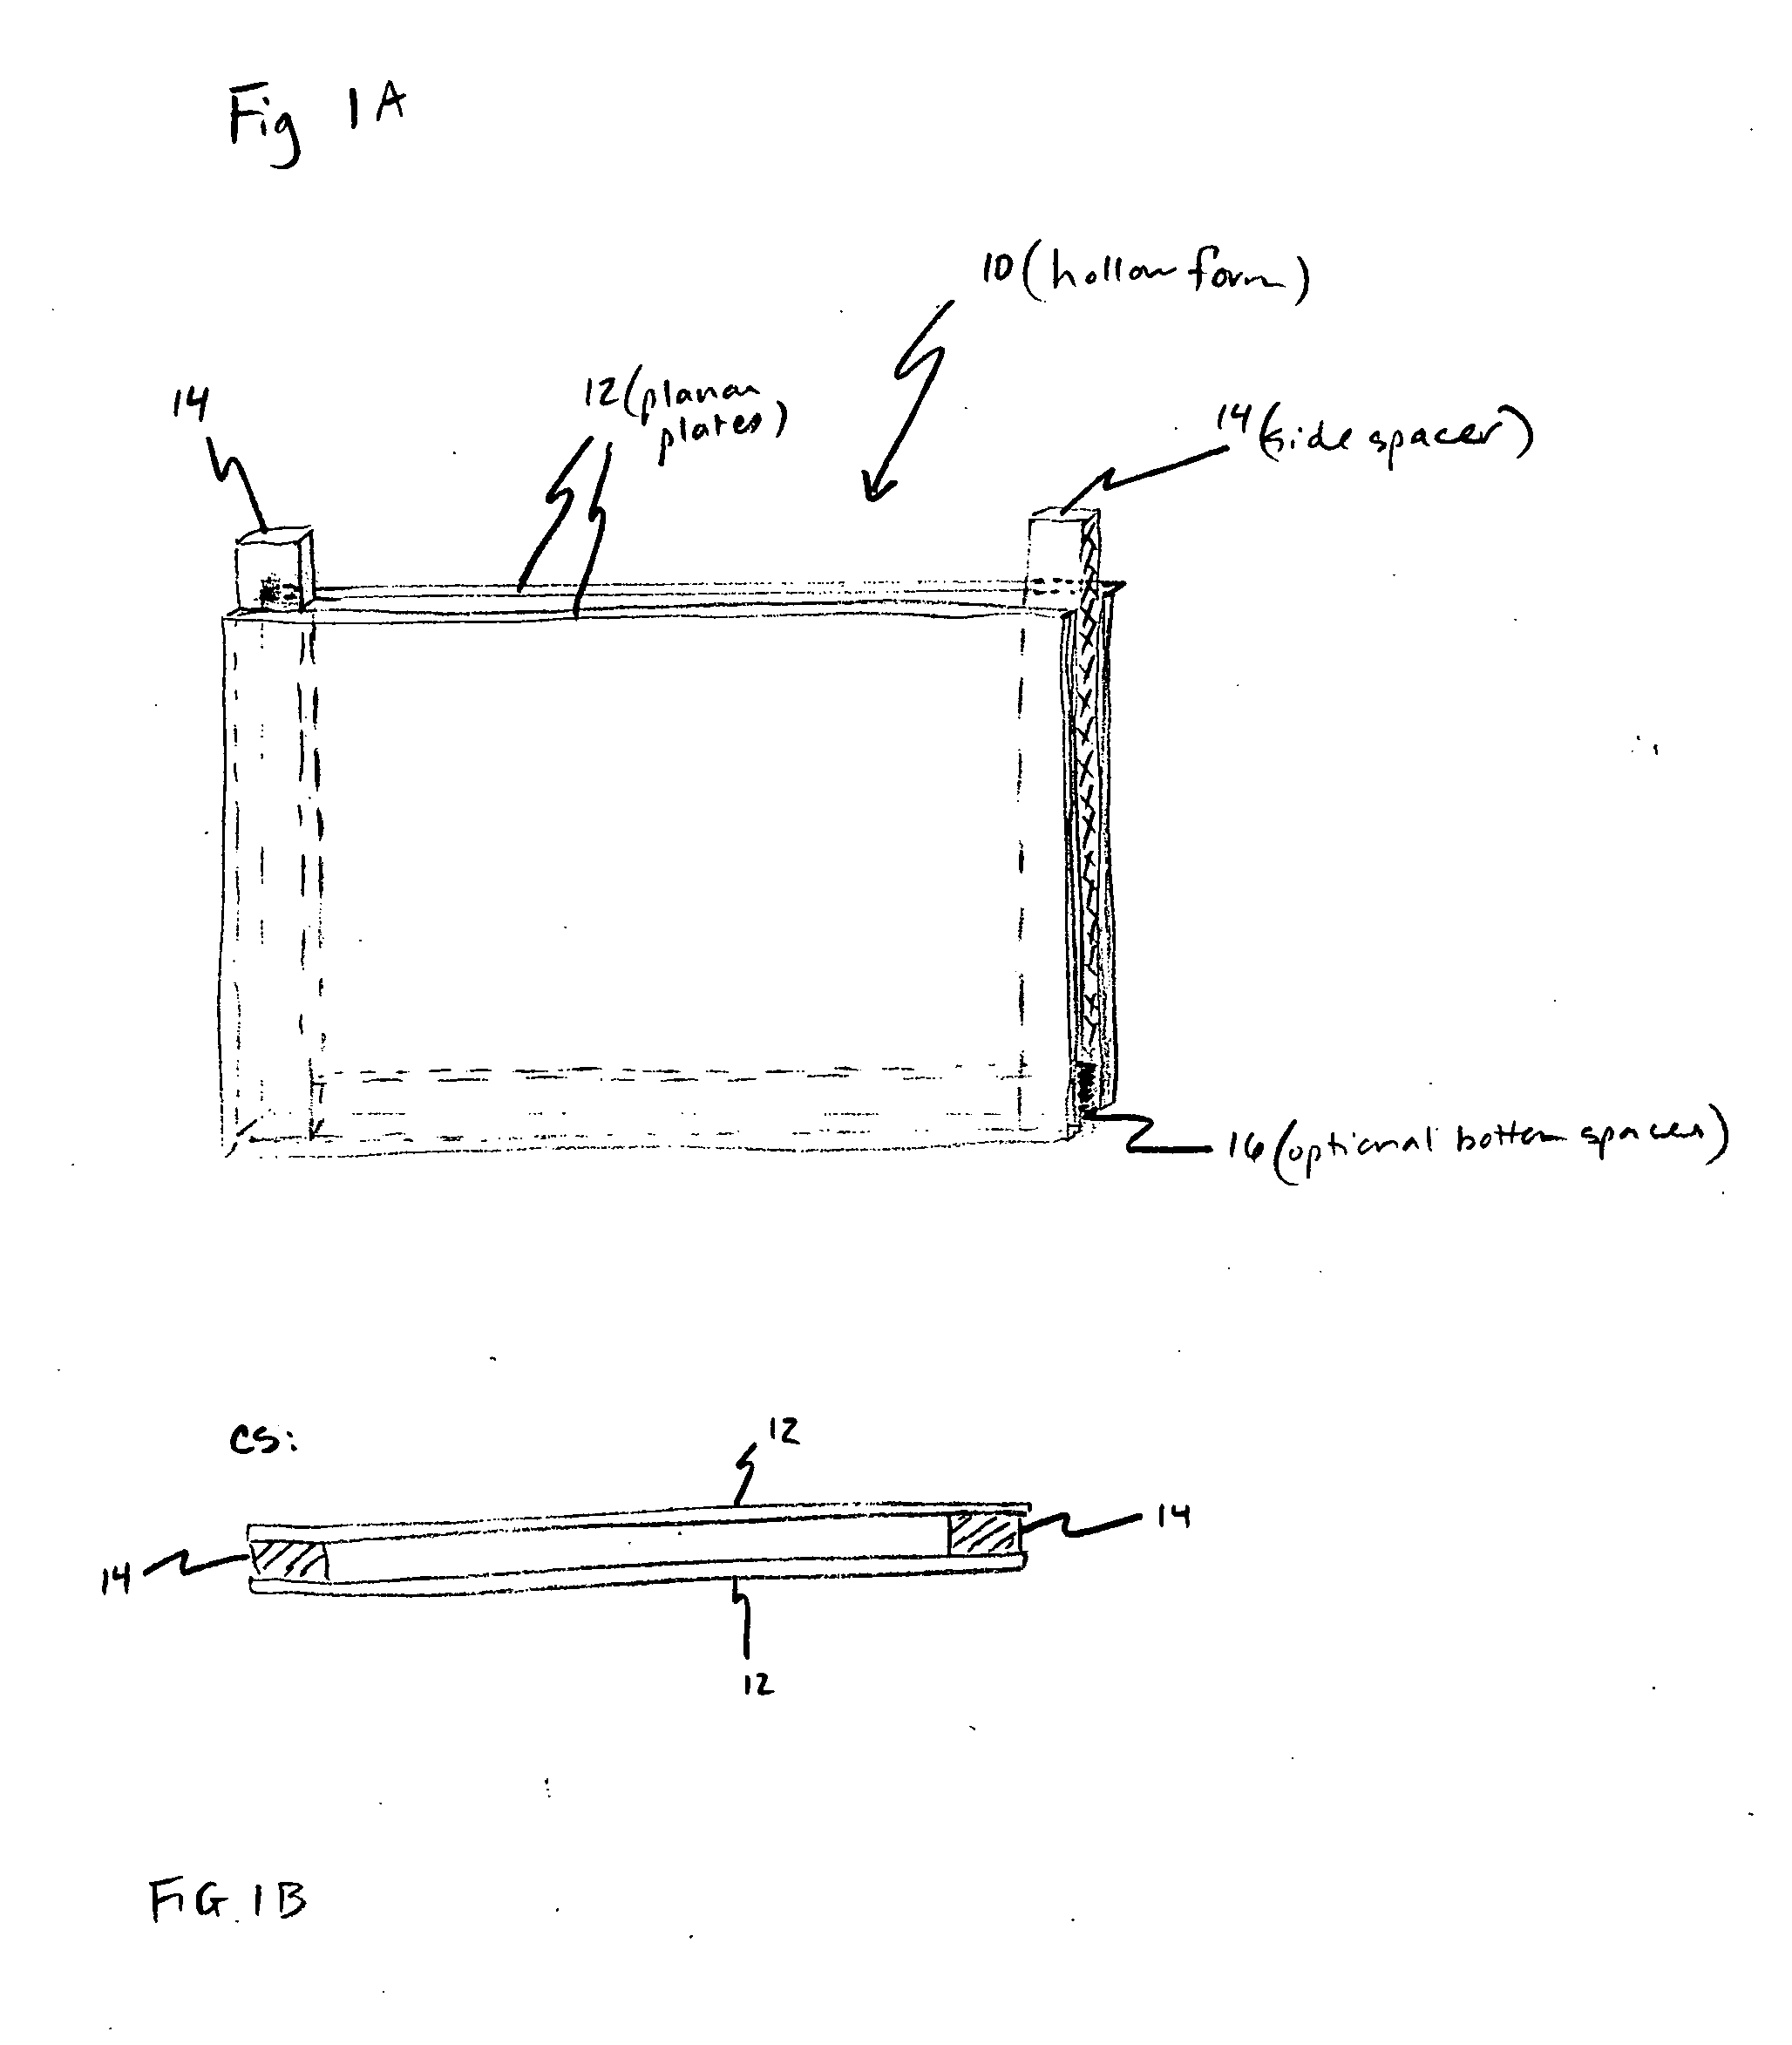 Method for rapid detection and evaluation of cultured cell growth